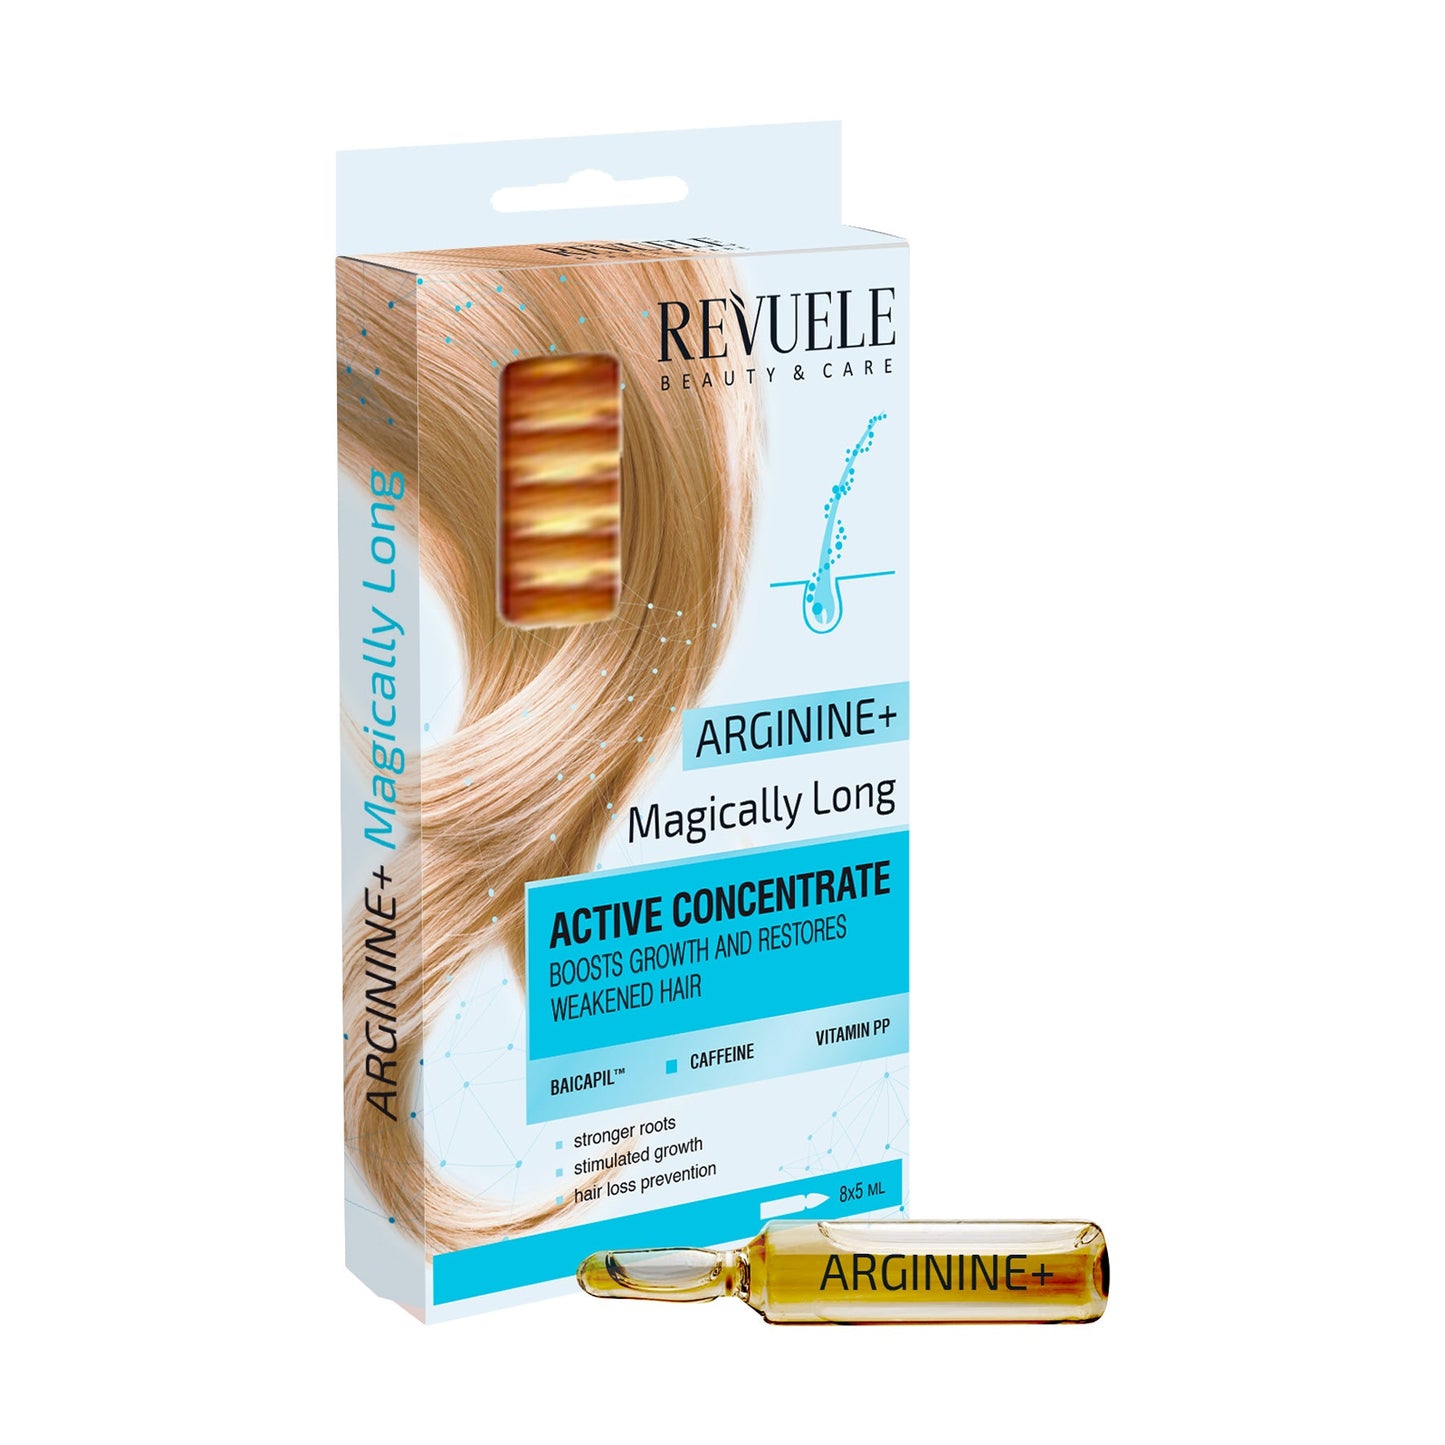 Revuele ACTIVE HAIR CONCENTRATE Arginine + “Magically Long”